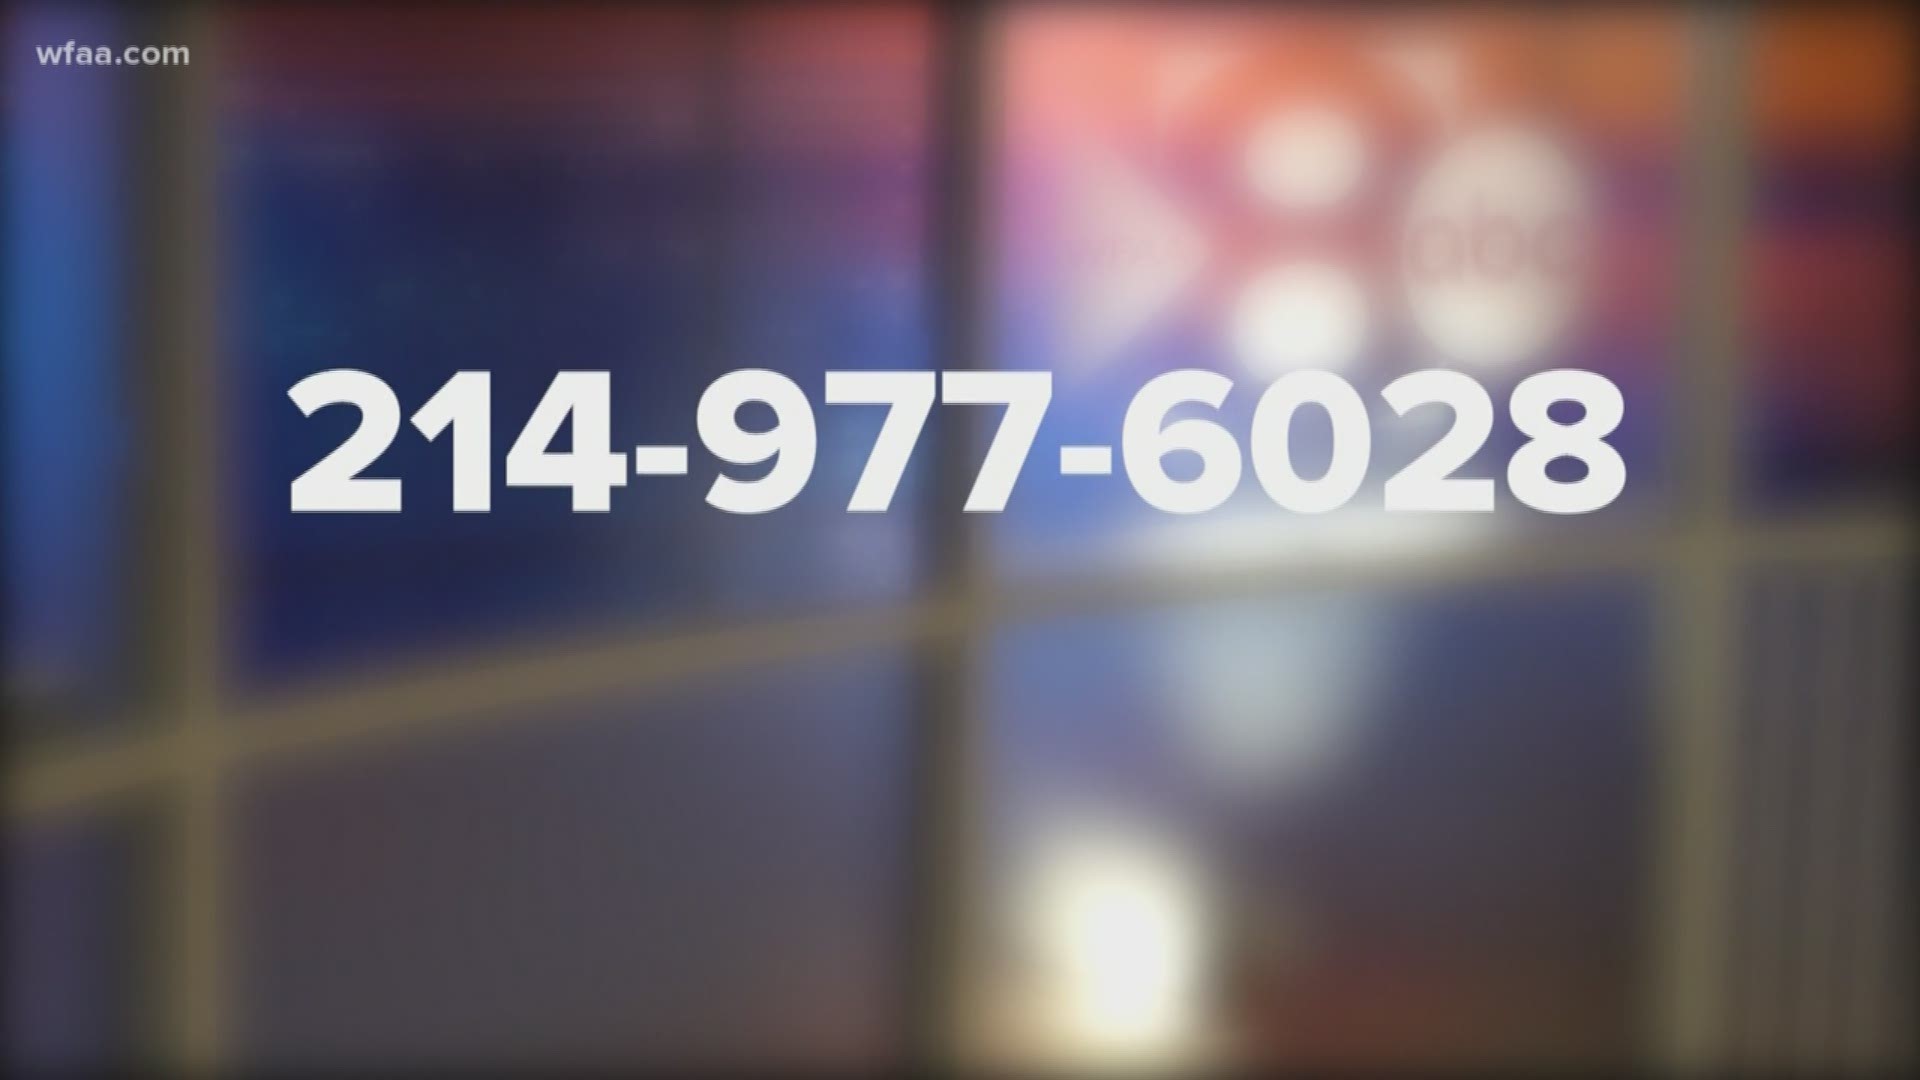 You can now message us by texting our station number. It's a direct line to our team of anchors, reporters and producers to send your tips, photos and video.